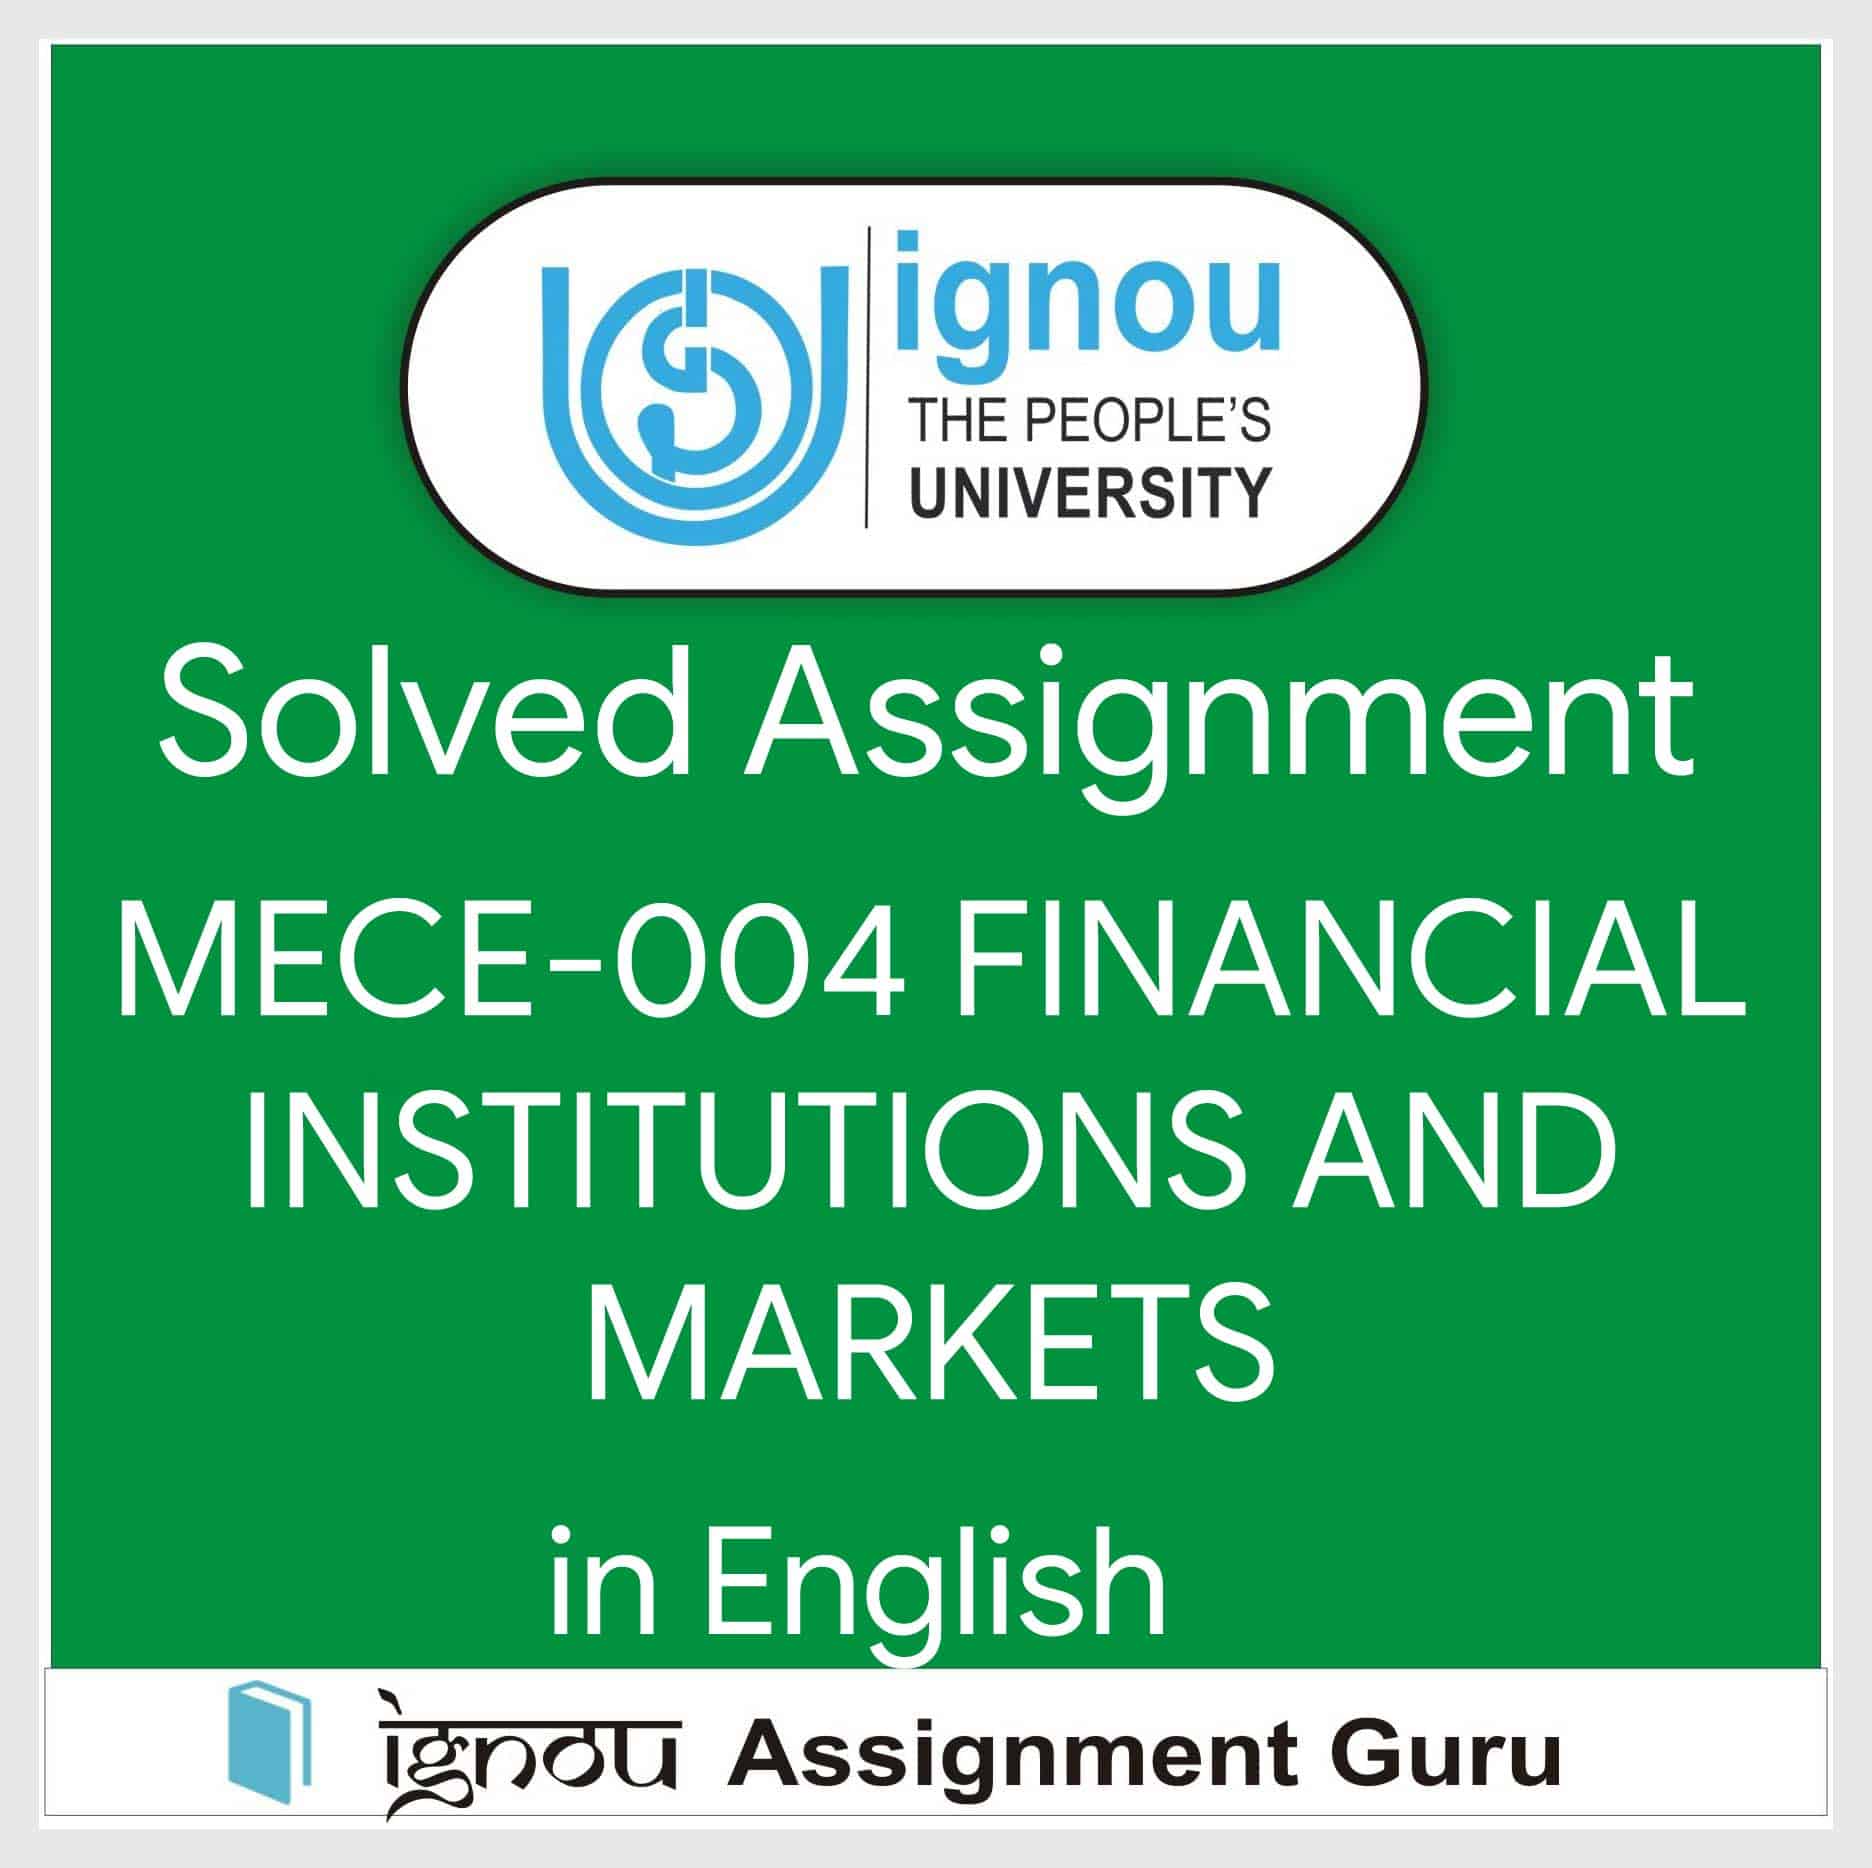 MECE-004 FINANCIAL INSTITUTIONS AND MARKETS in English SOLVED ASSIGNMENT 2022-2023